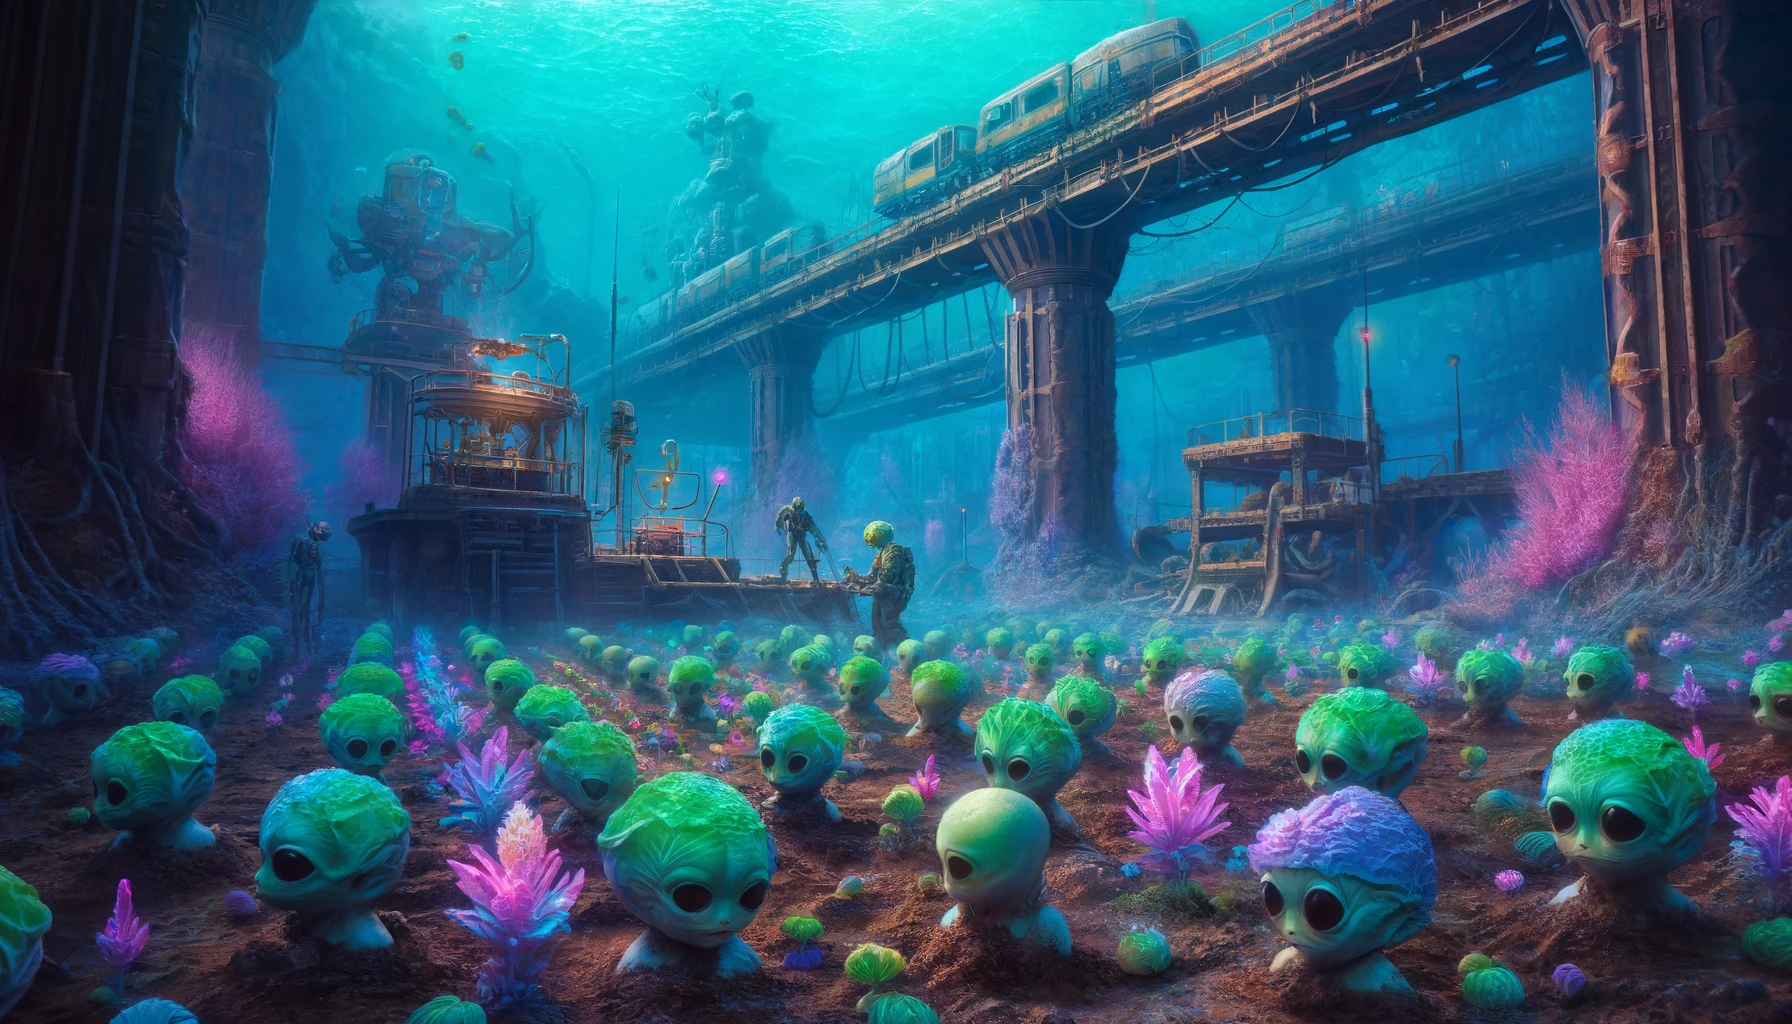 aliens under water, gardening in a field of alien and cabbage hybrids that are growing out of the ground with run-down metal structures in the background